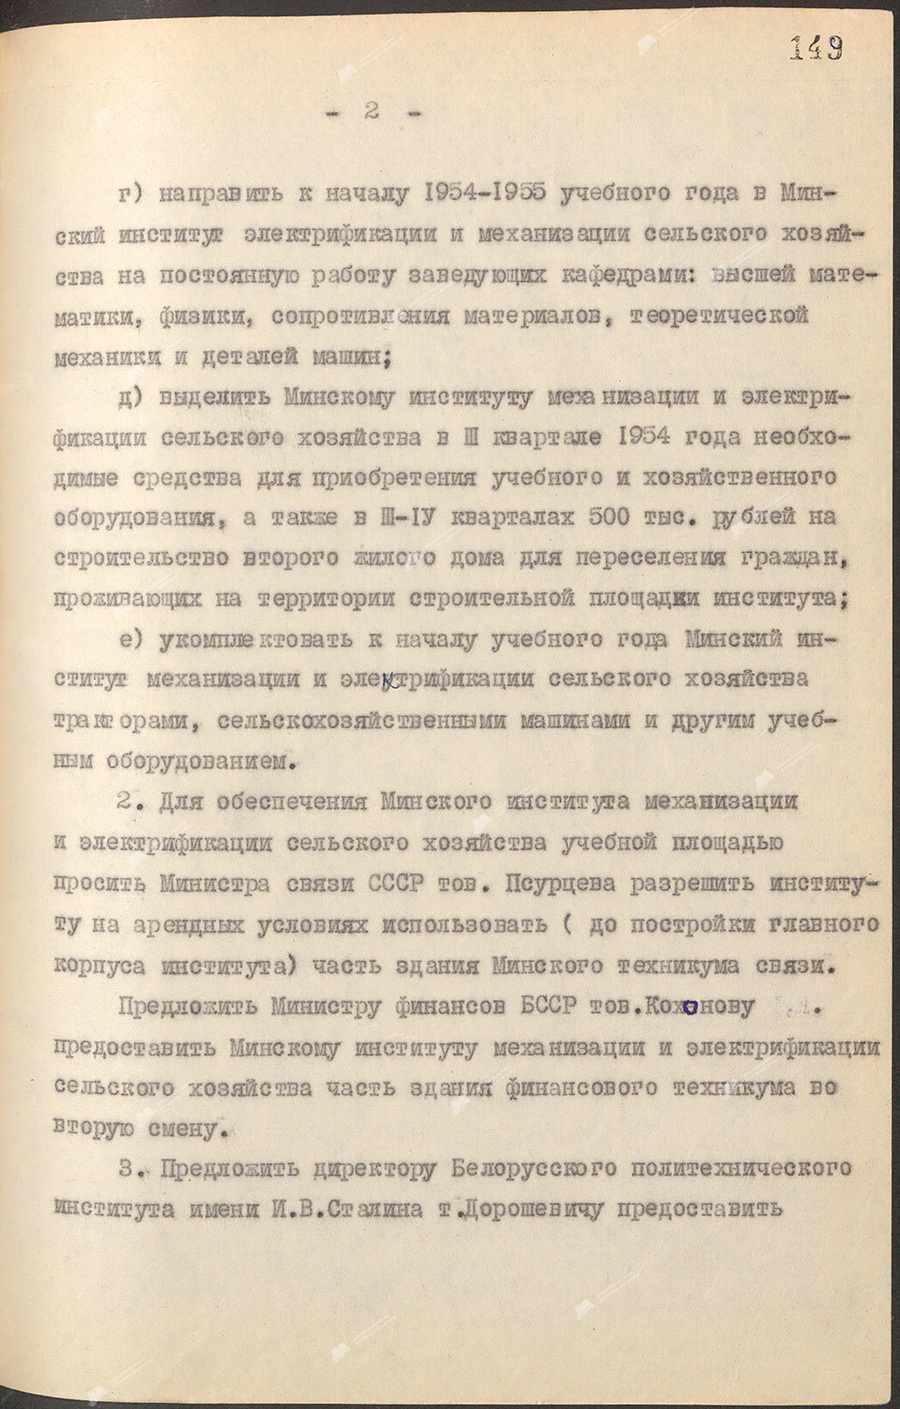 Resolution No. 638 of the Council of Ministers of the Byelorussian SSR and the Central Committee of the Communist Party of Belarus «On the opening of classes at the Minsk Institute of Mechanization and Electrification of Agriculture»-стр. 1